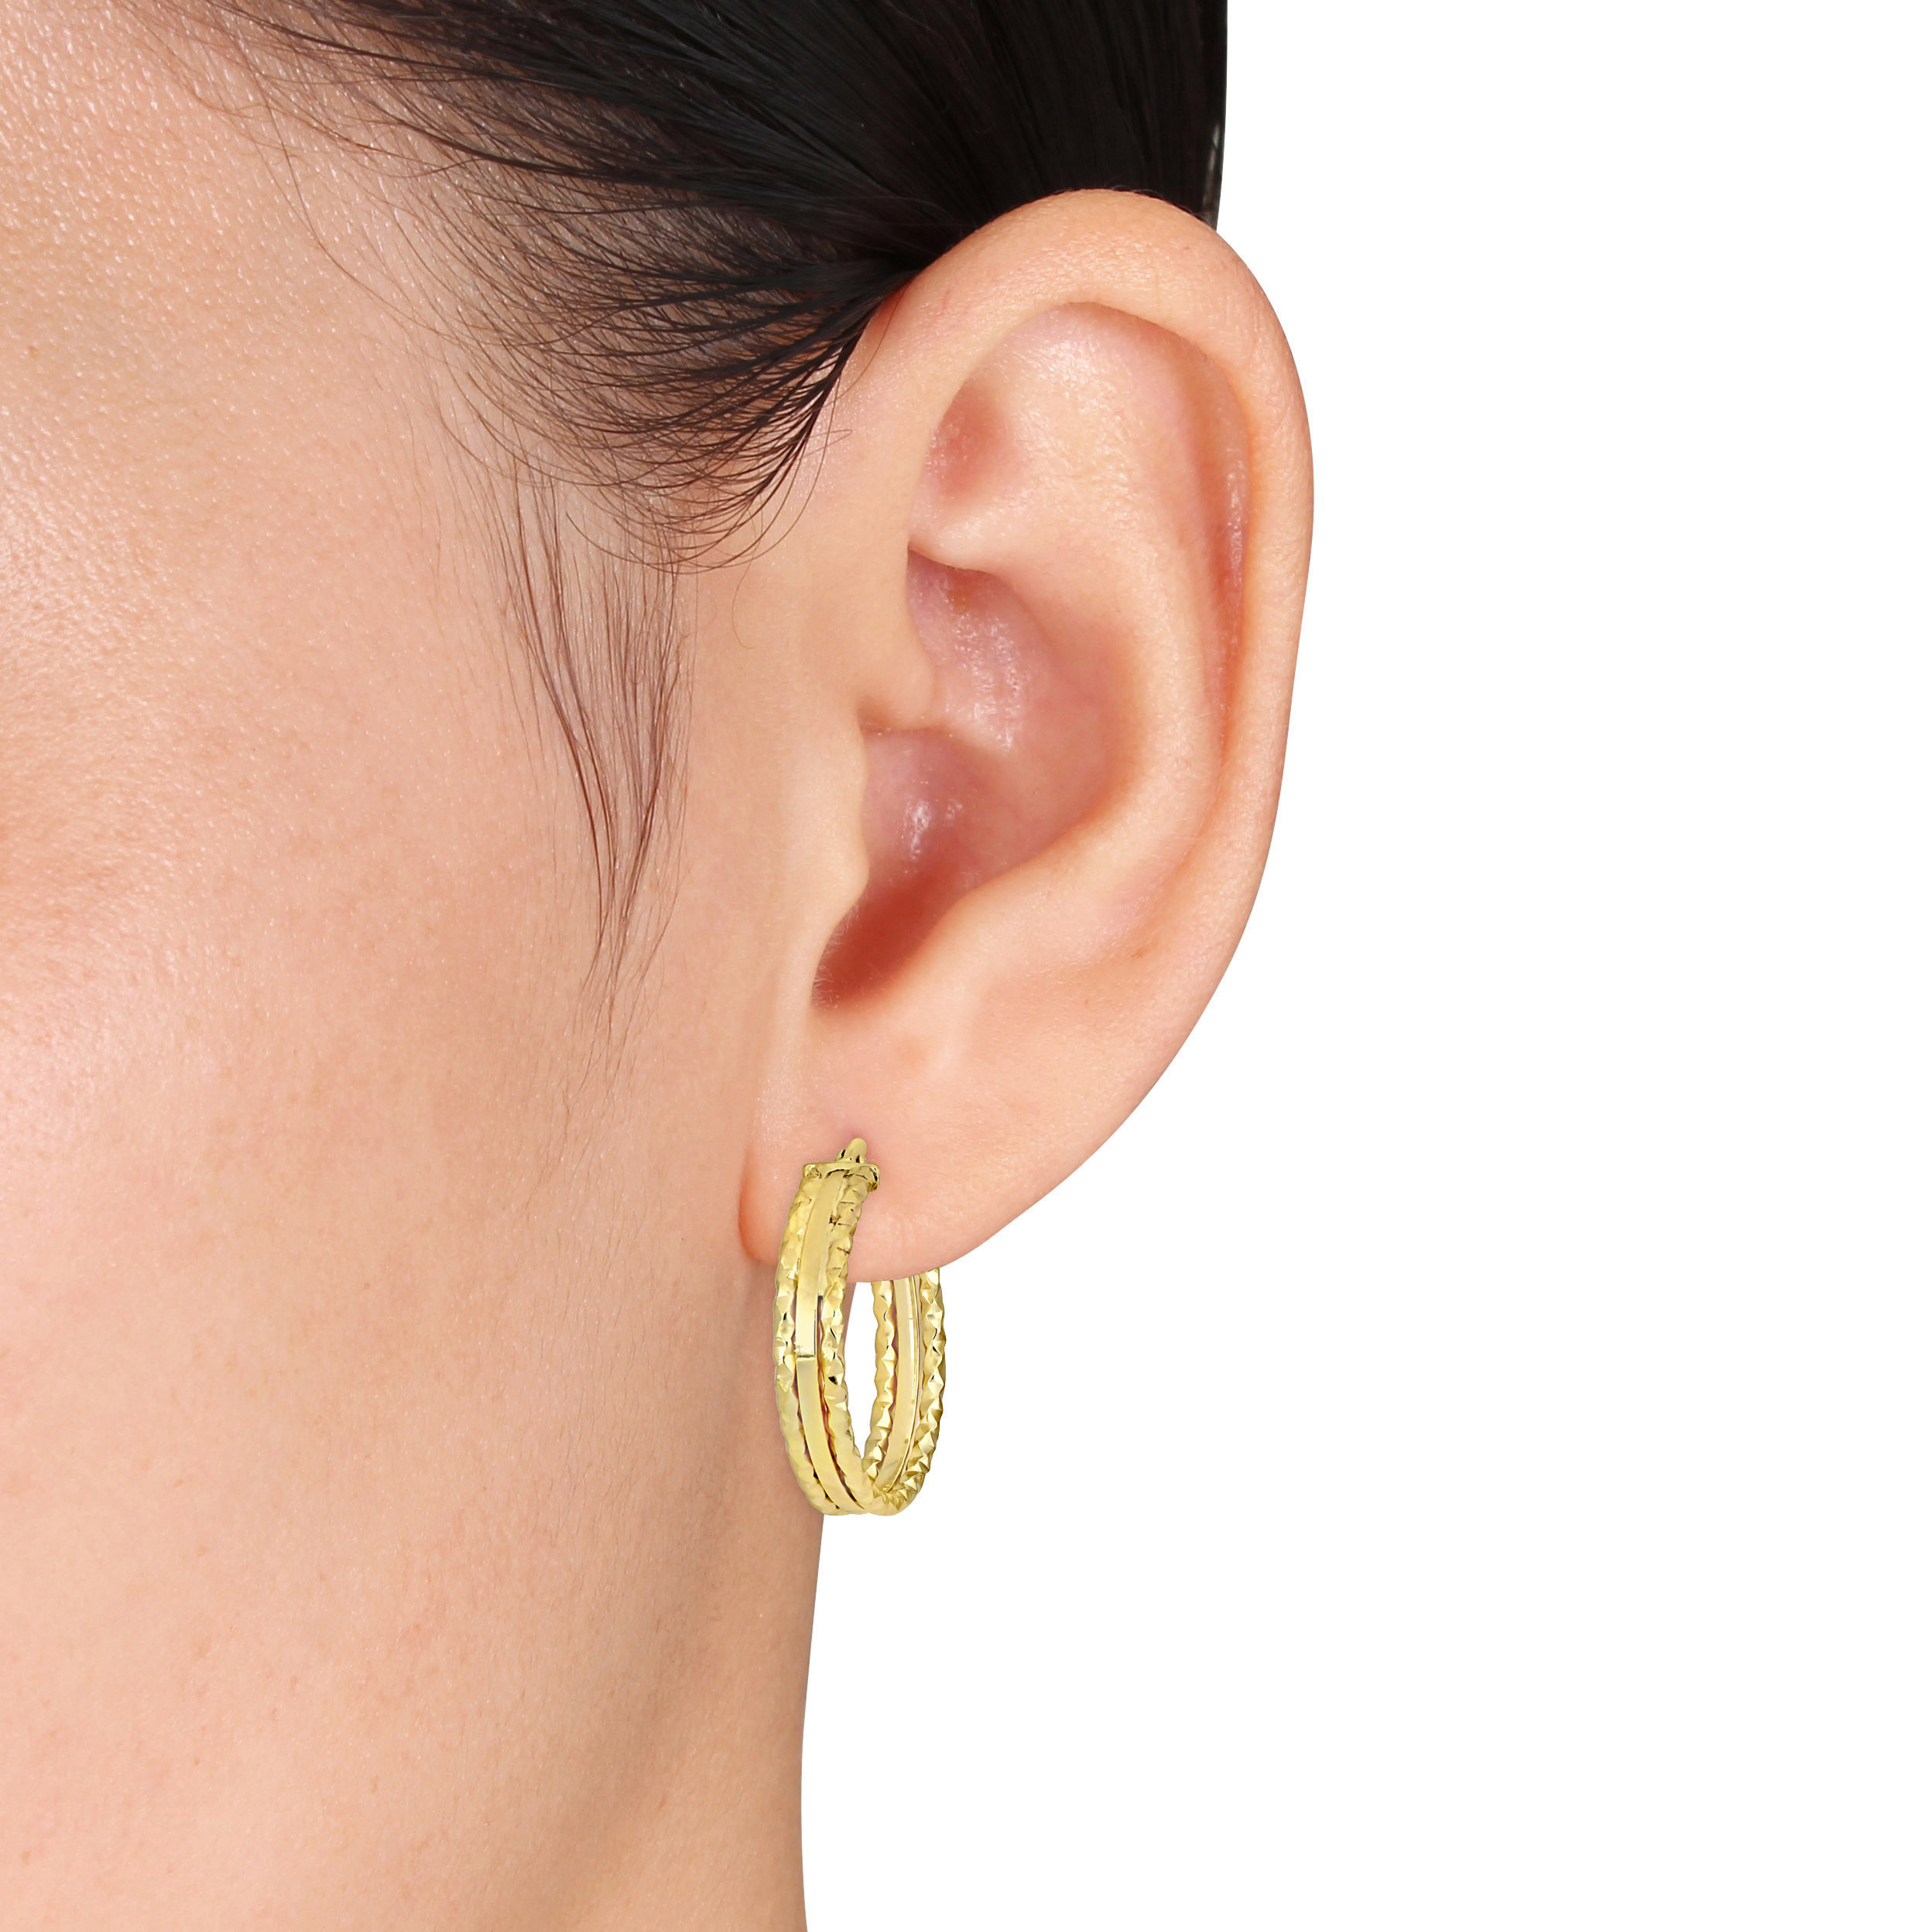 25 MM 3-Row Texture and Polished Hoop Earrings in 10k Yellow Gold (4.75 MM Wide)